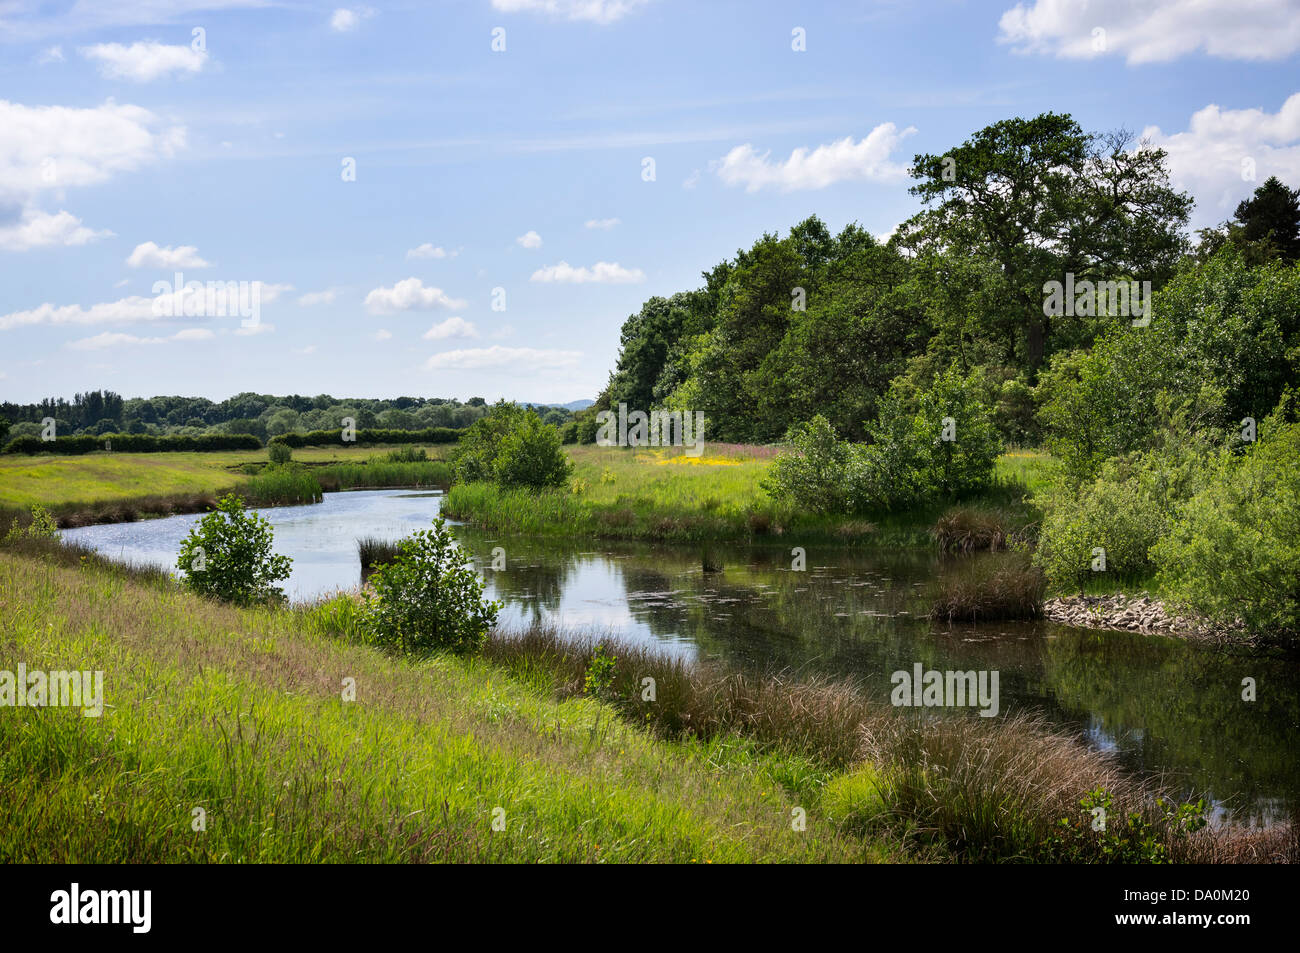 Ellerton Quarry, North Yorkshire.  Land reclamation from a former gravel pit, now managed as a nature reserve. Stock Photo